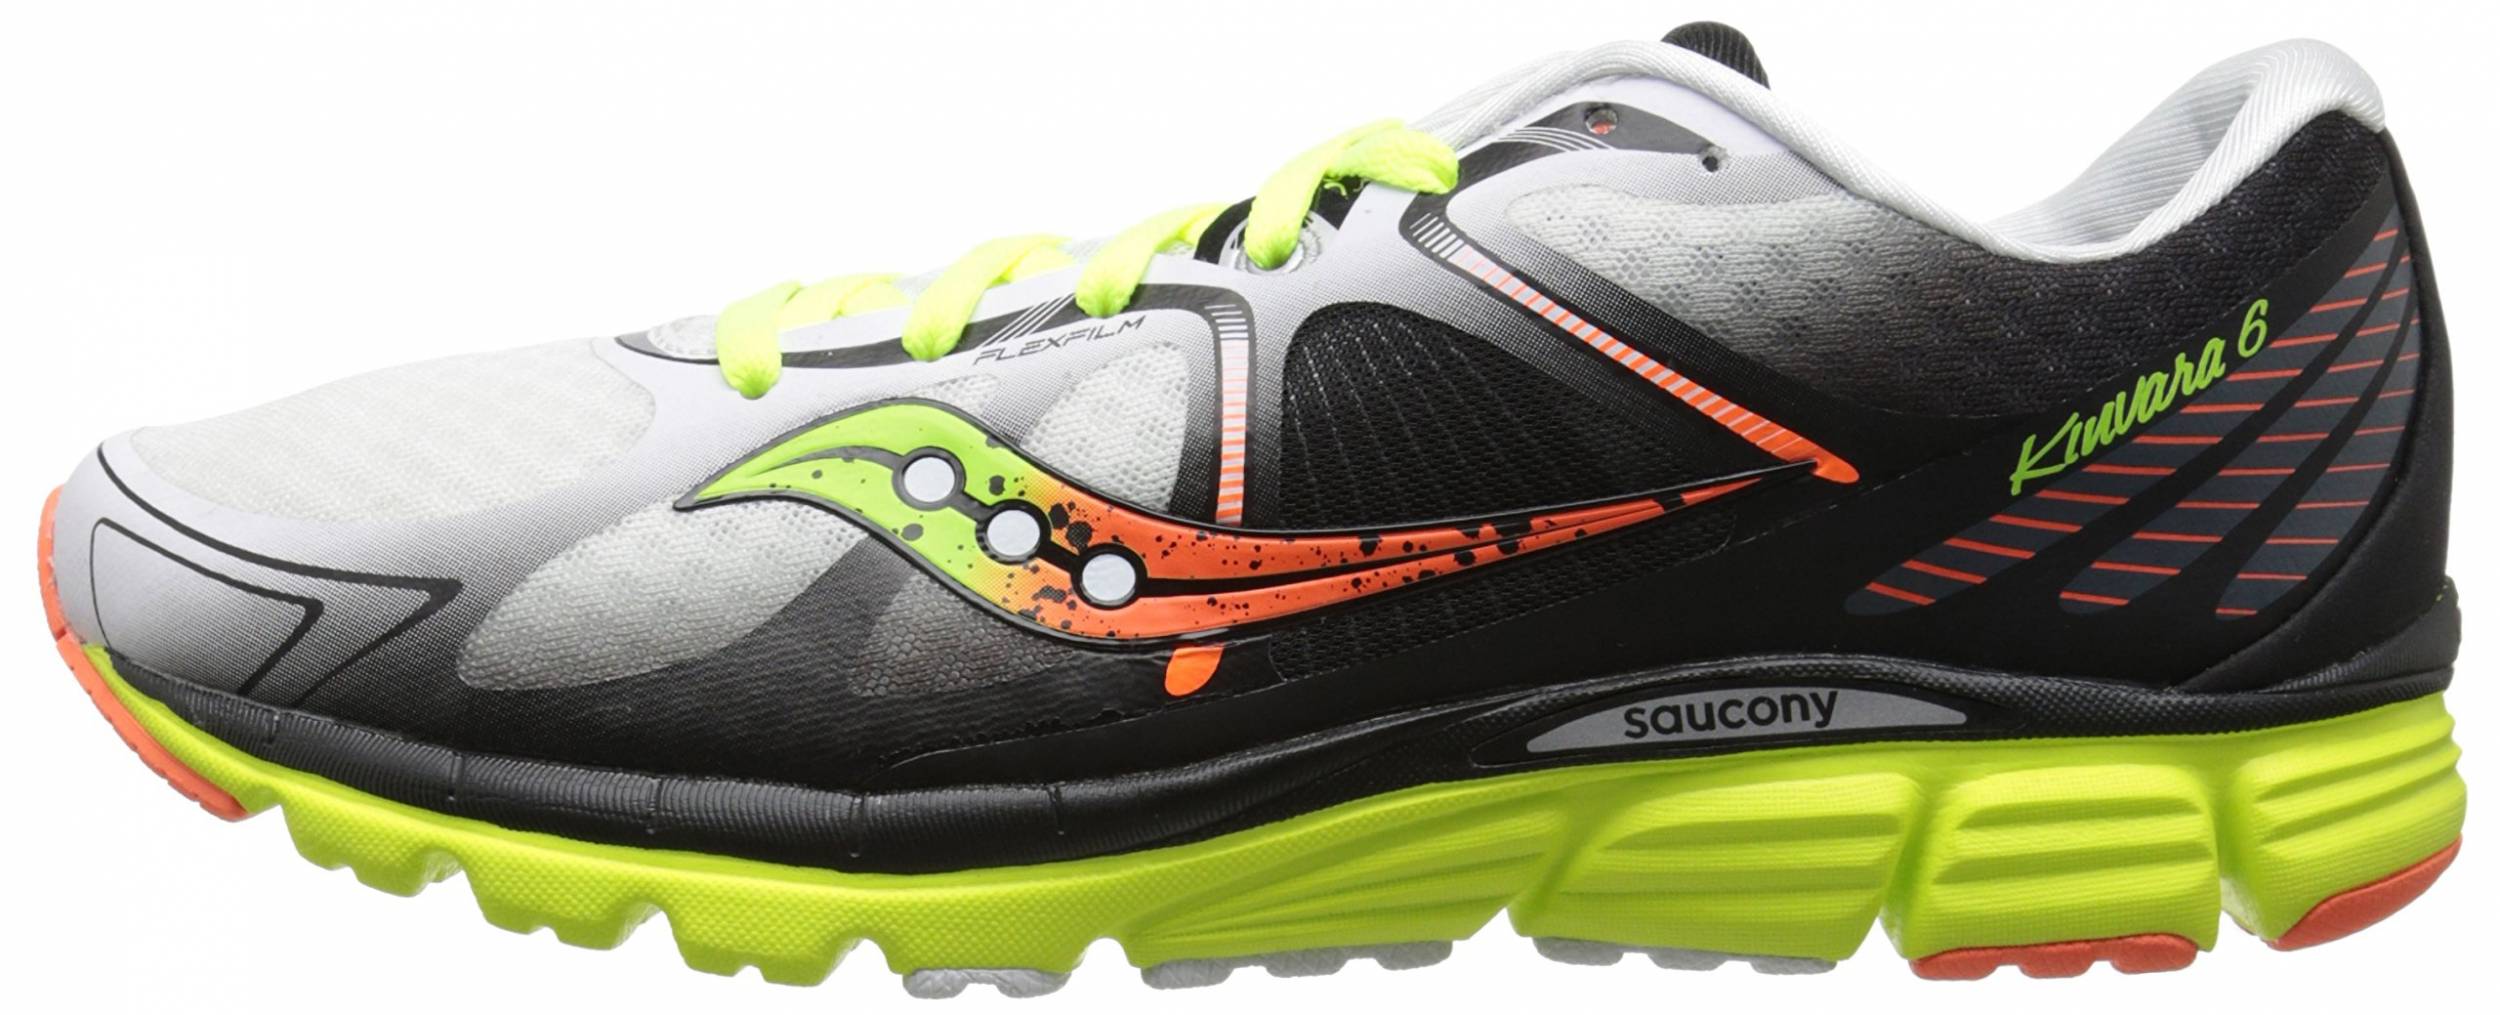 Only $80 + Review of Saucony Kinvara 6 